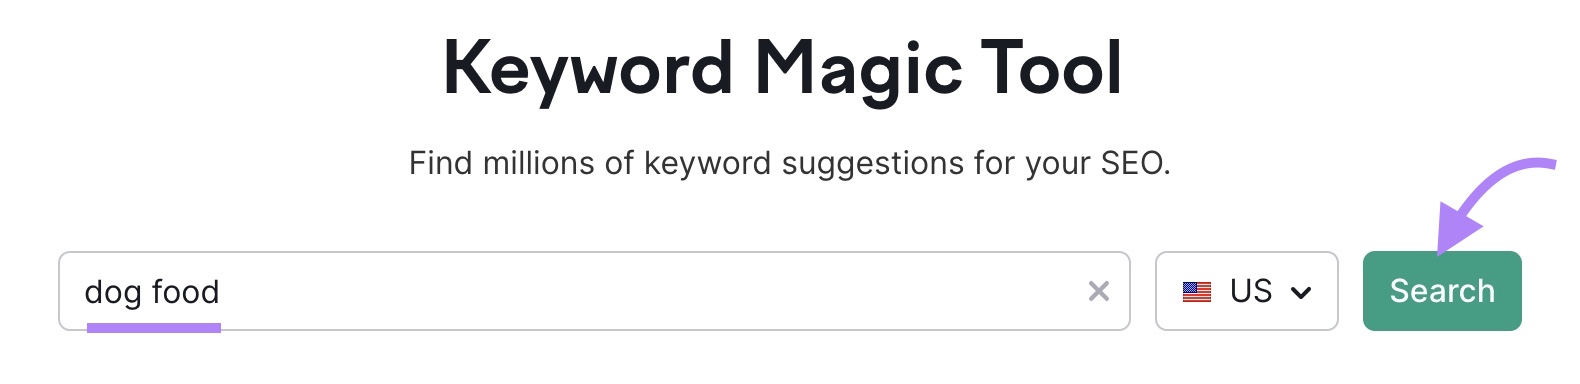 Keyword magic tool search bar with the term 'dog food' entered.